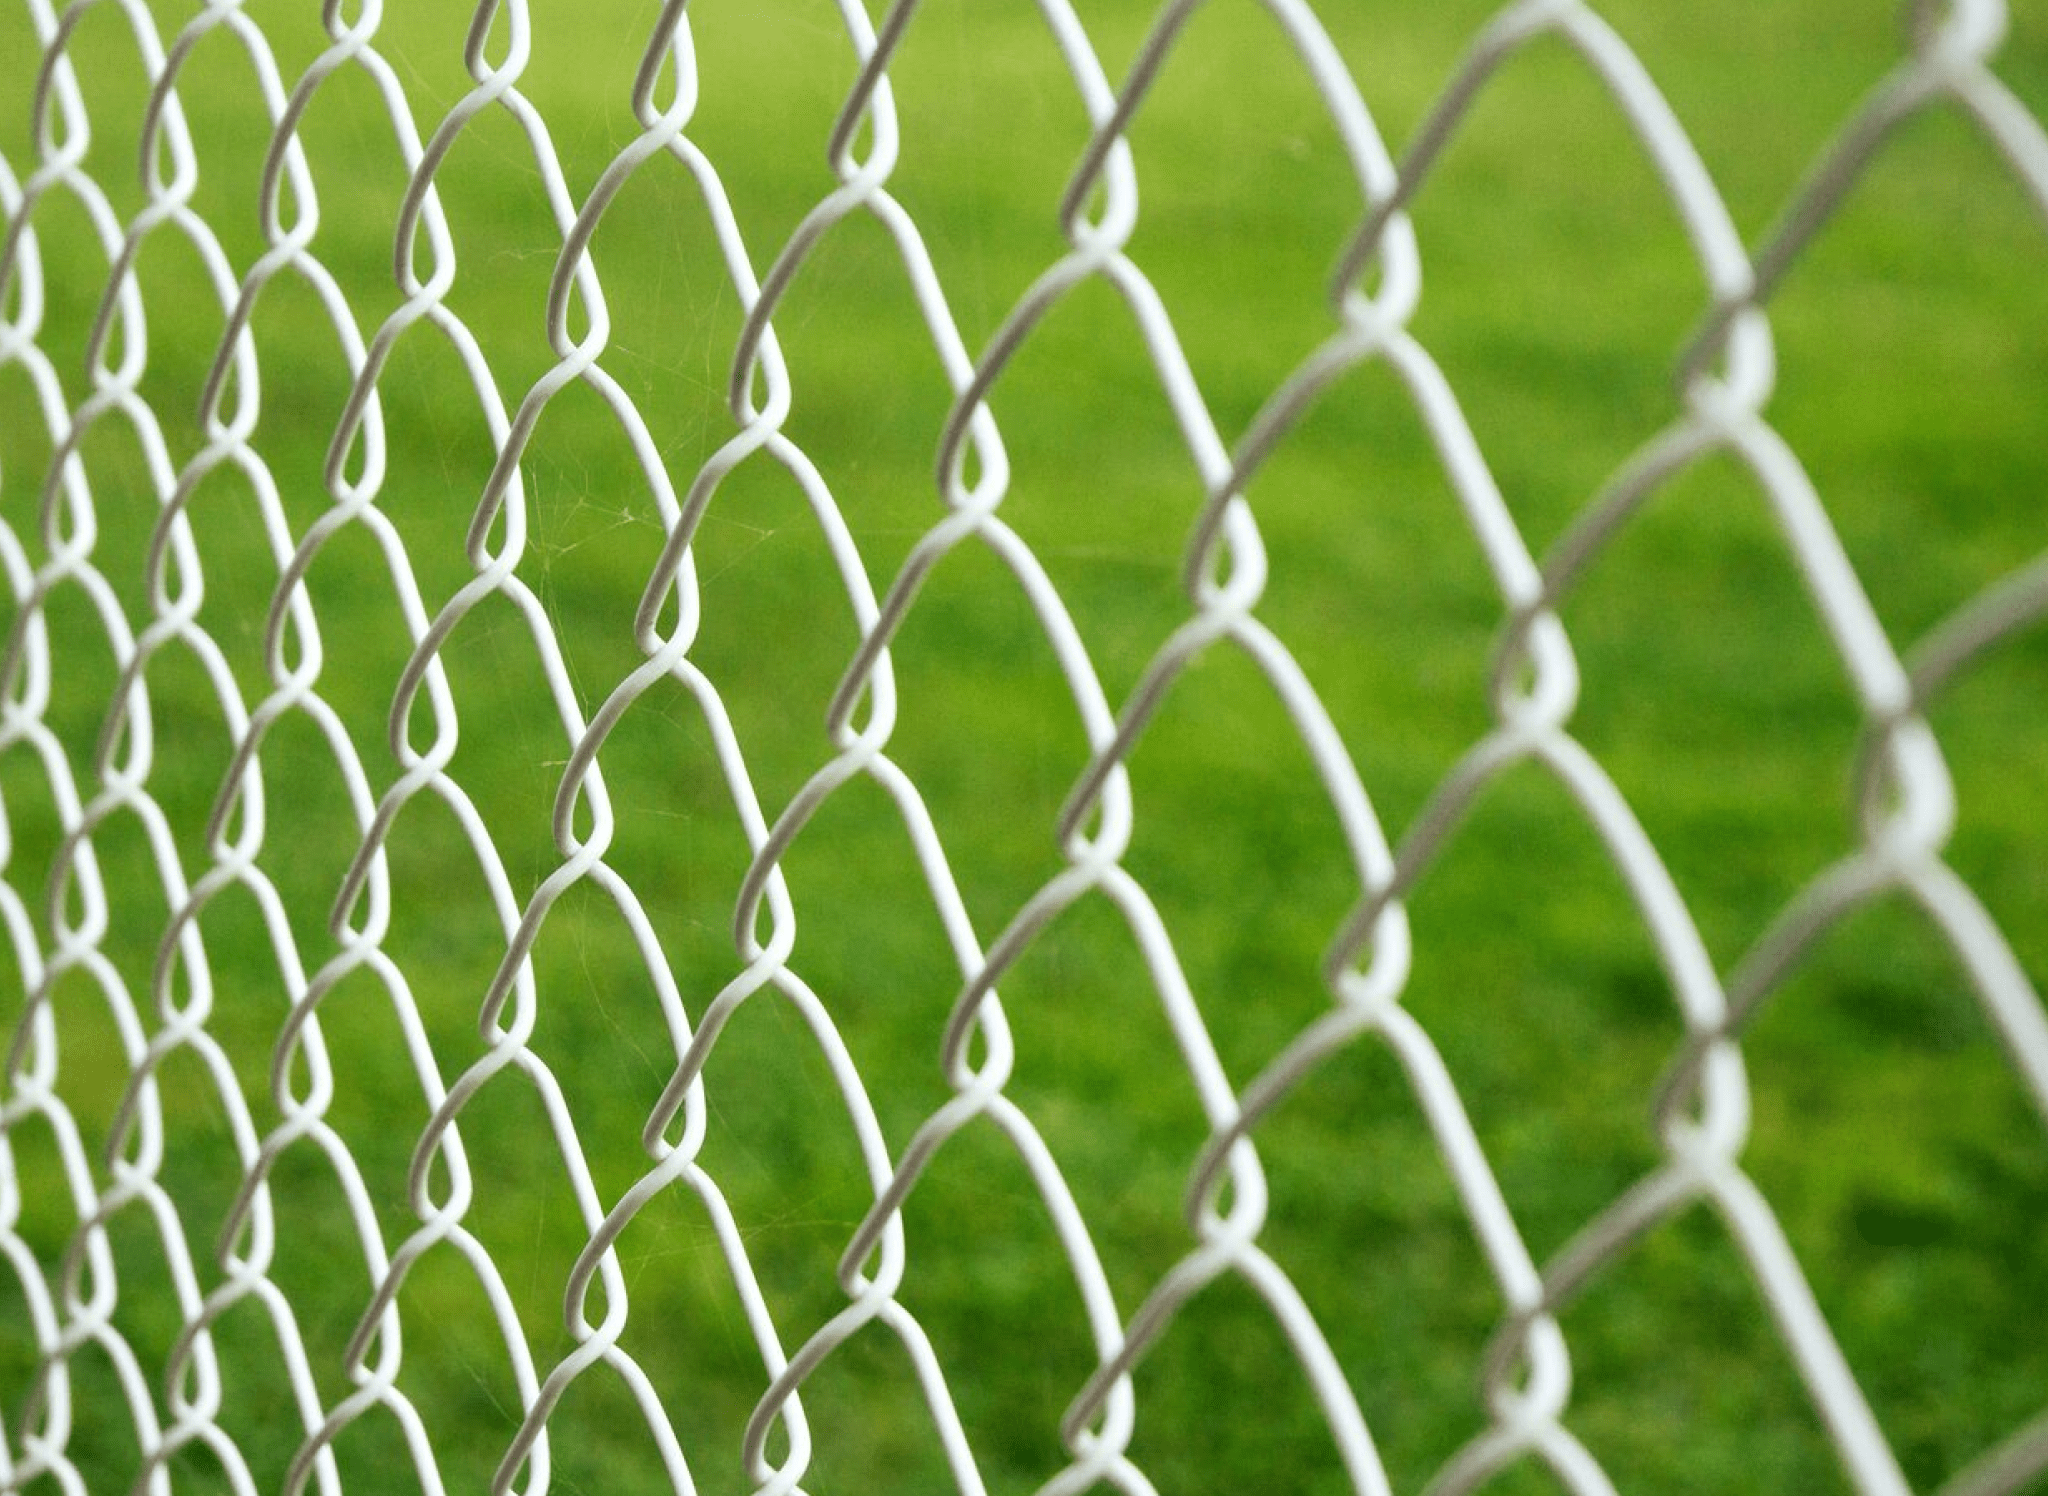 2020 Chain Link Fence Cost Calculator Cost to Install Per Linear Foot